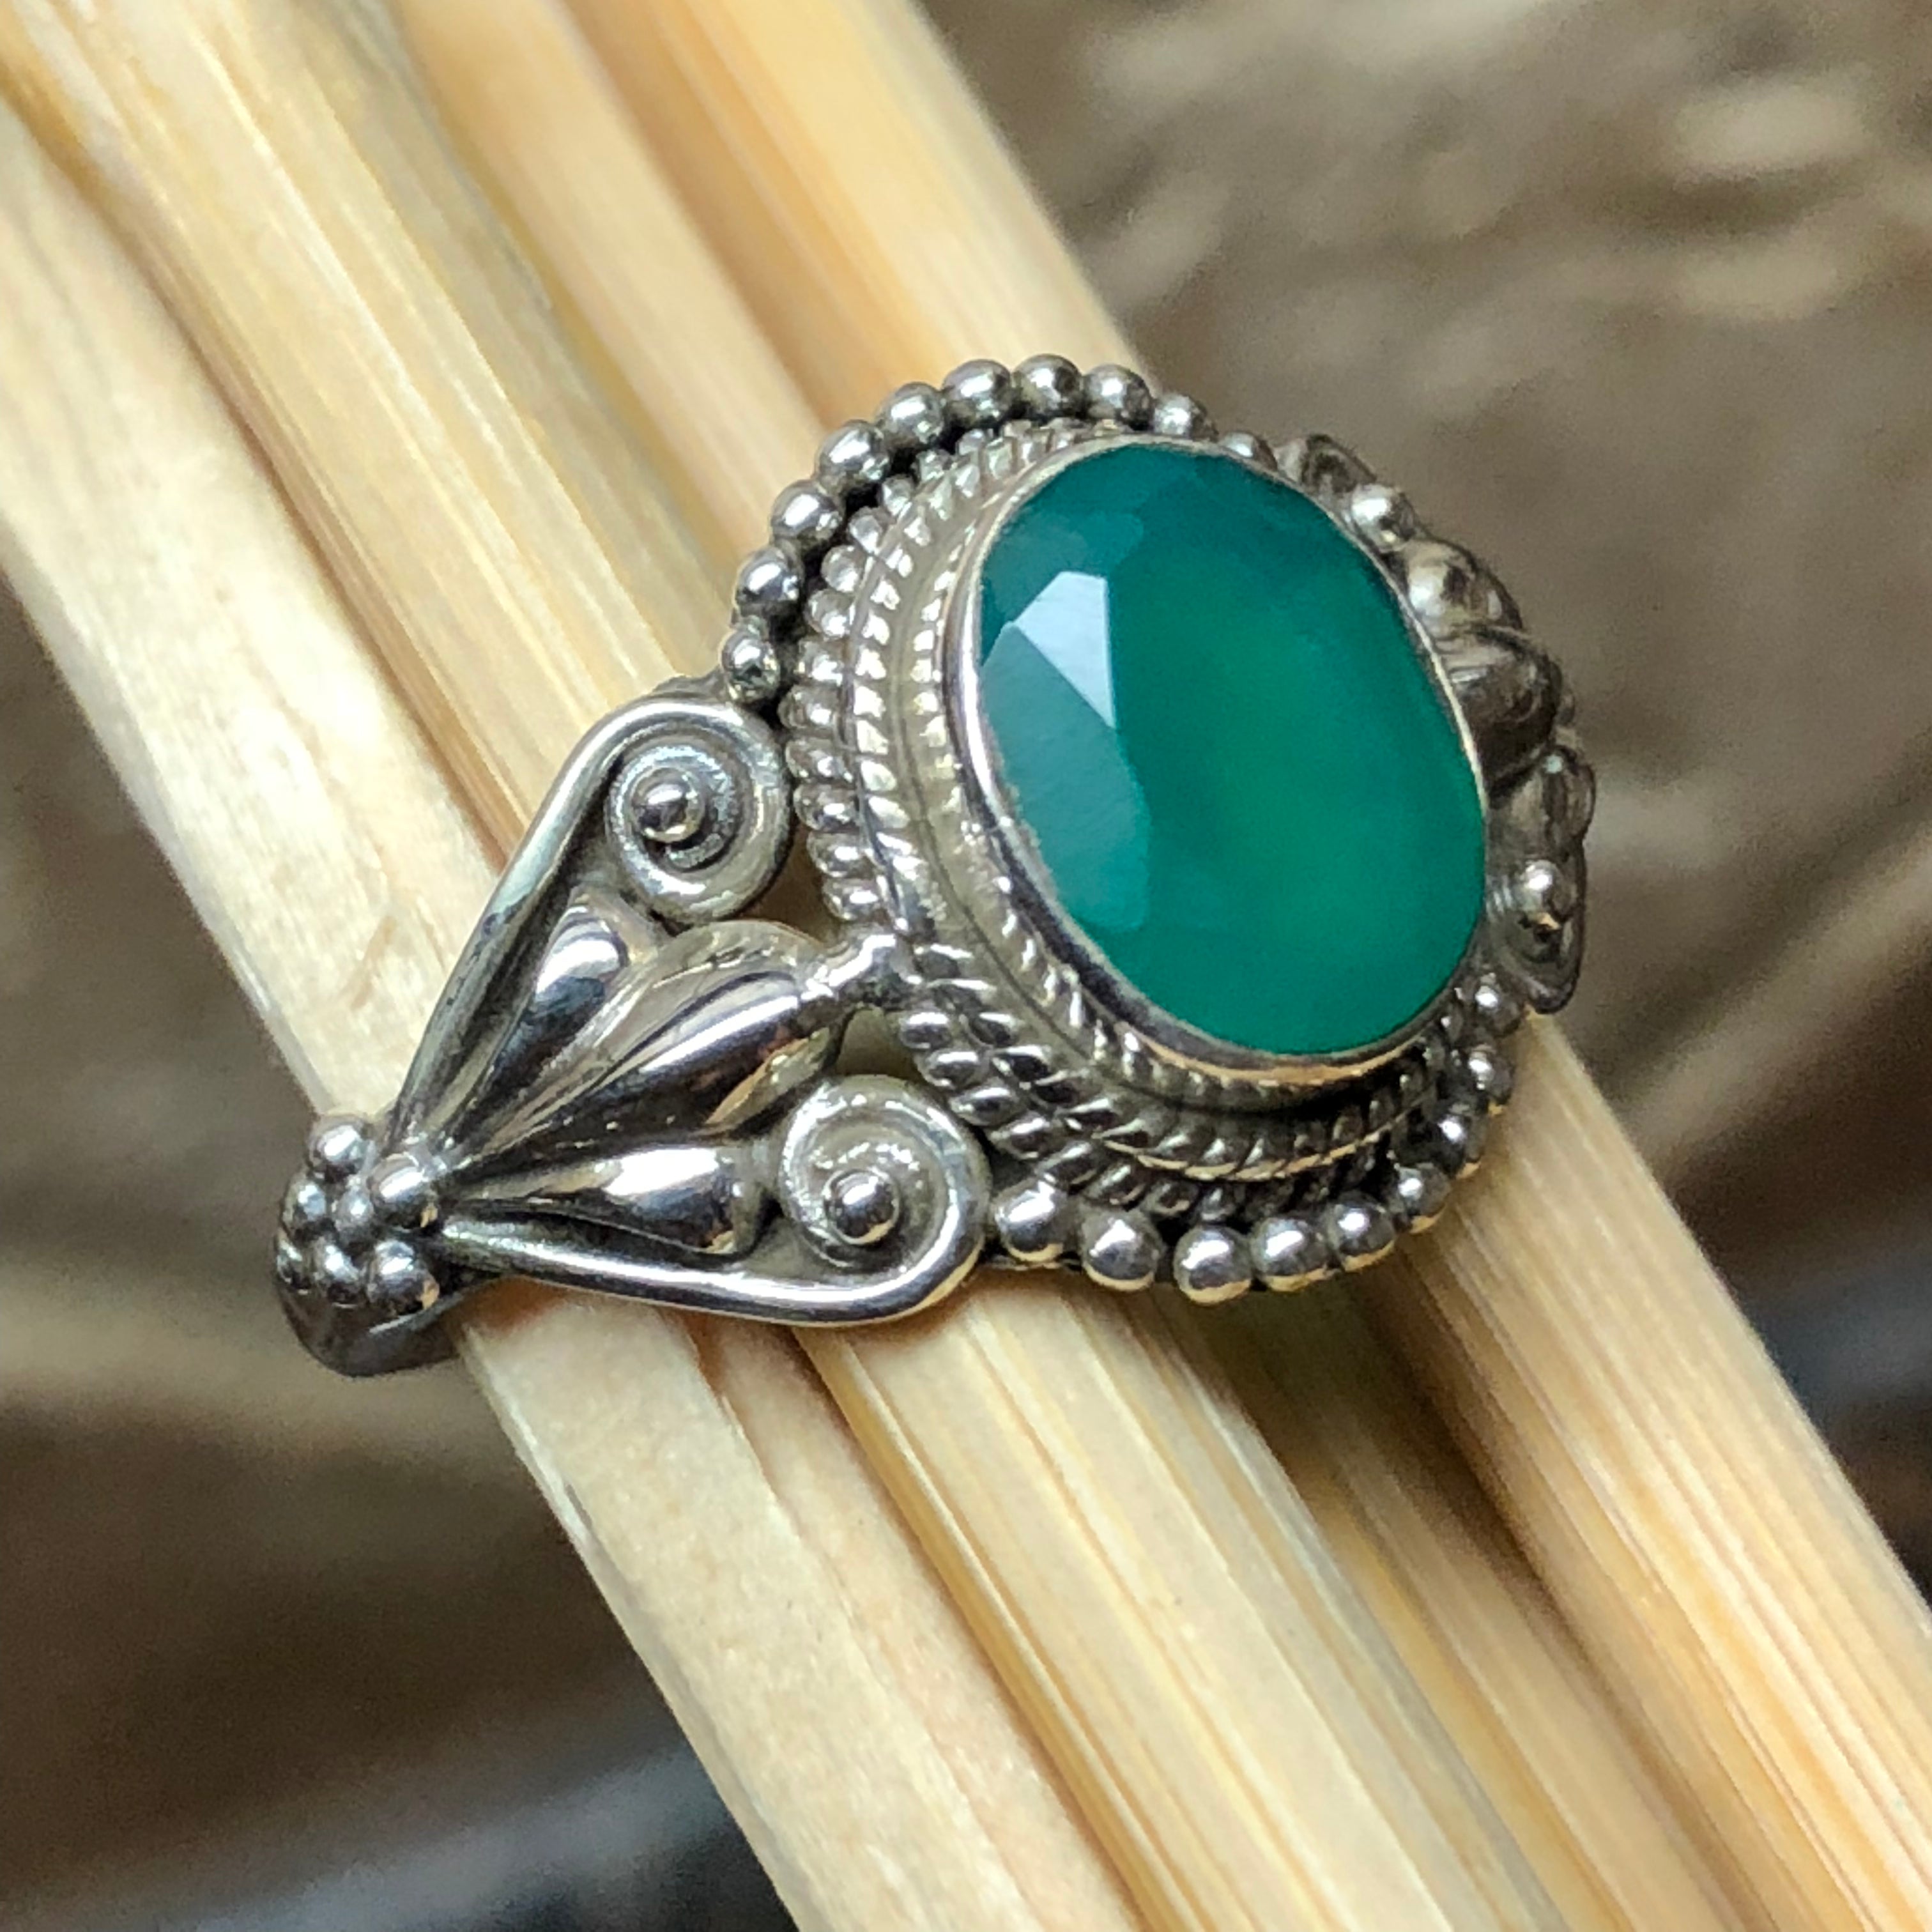 Genuine 2ct Green Onyx 925 Solid Sterling Silver Engagement Ring Size 6, 7, 8, 9 - Natural Rocks by Kala